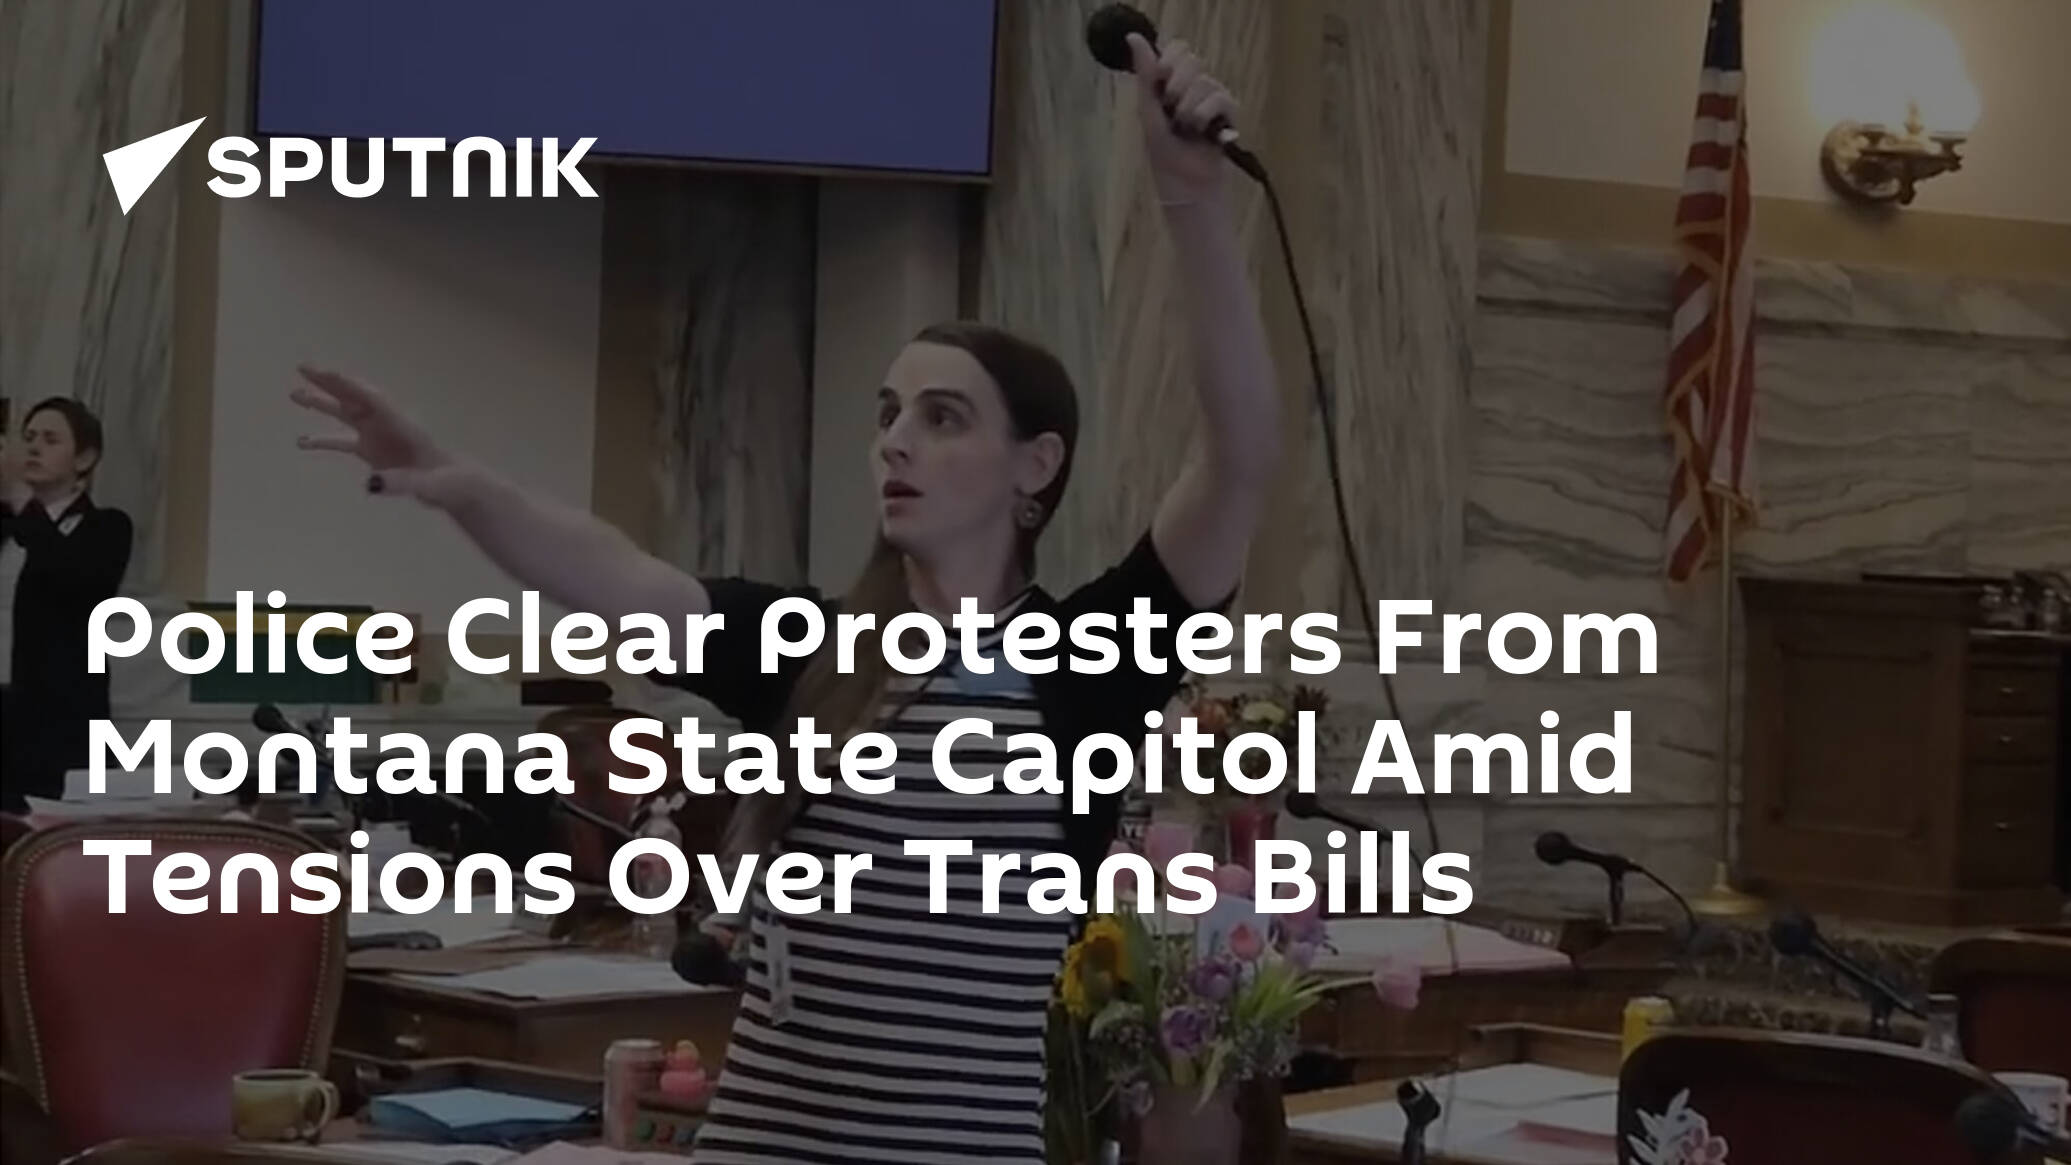 Police Clear Protesters From Montana State Capitol Amid Tensions Over Trans Bills